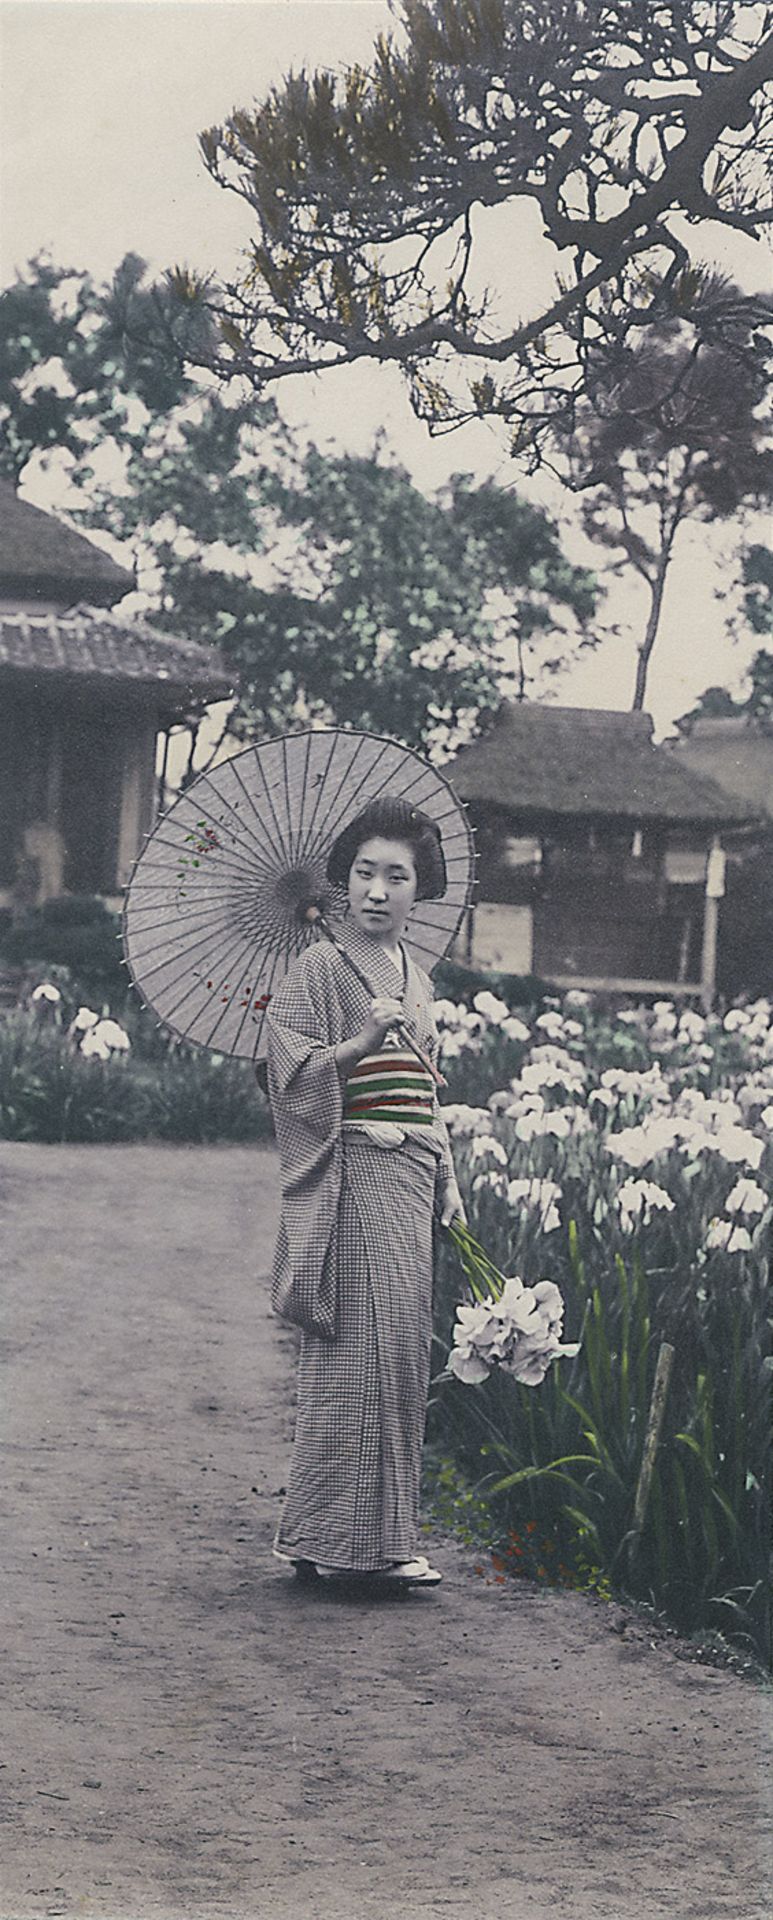 Japan: Portraits of women in traditional dressPhotographer unknown. Portraits of Japanese women in